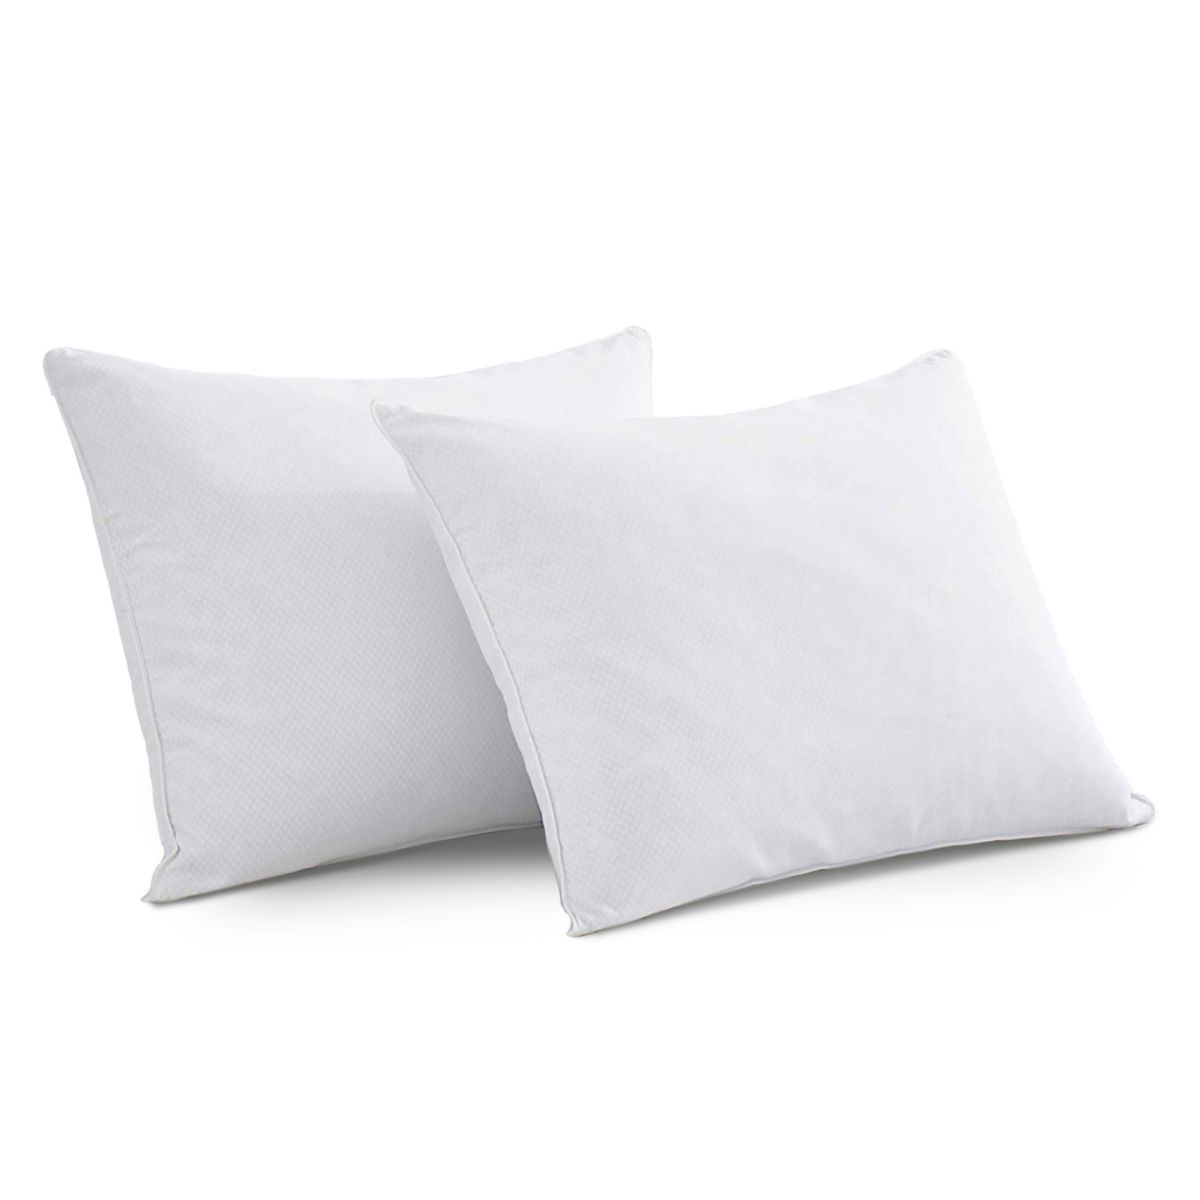 Unikome 2 Pack PCM Technology Temperature Perfection Cooling Goose Down Feather Pillow UNIKOME